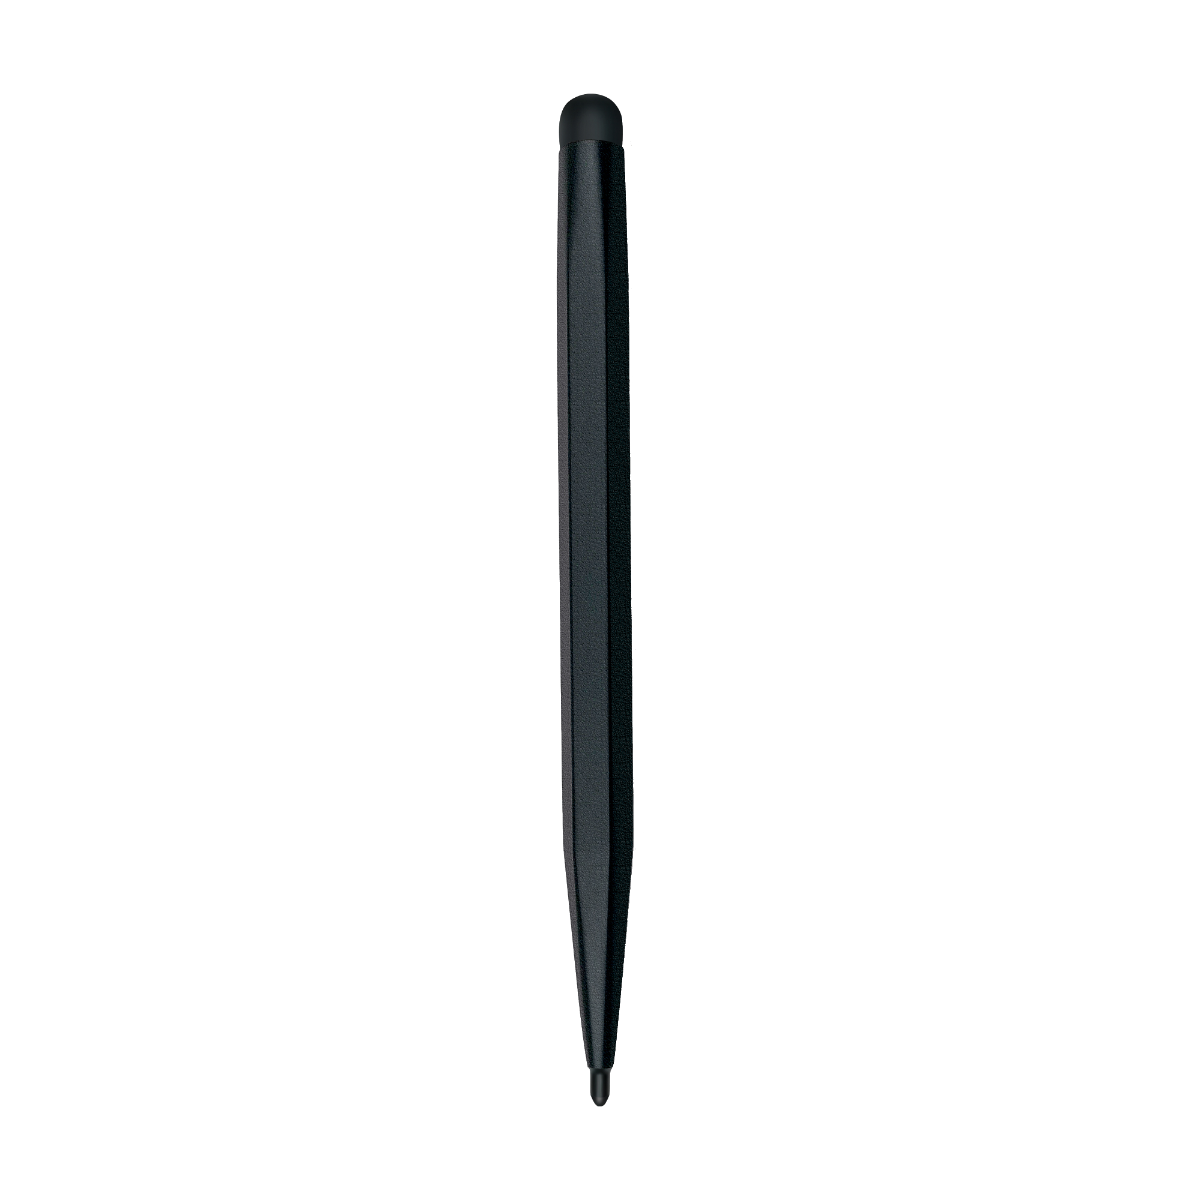 Stylus pen for interactive display